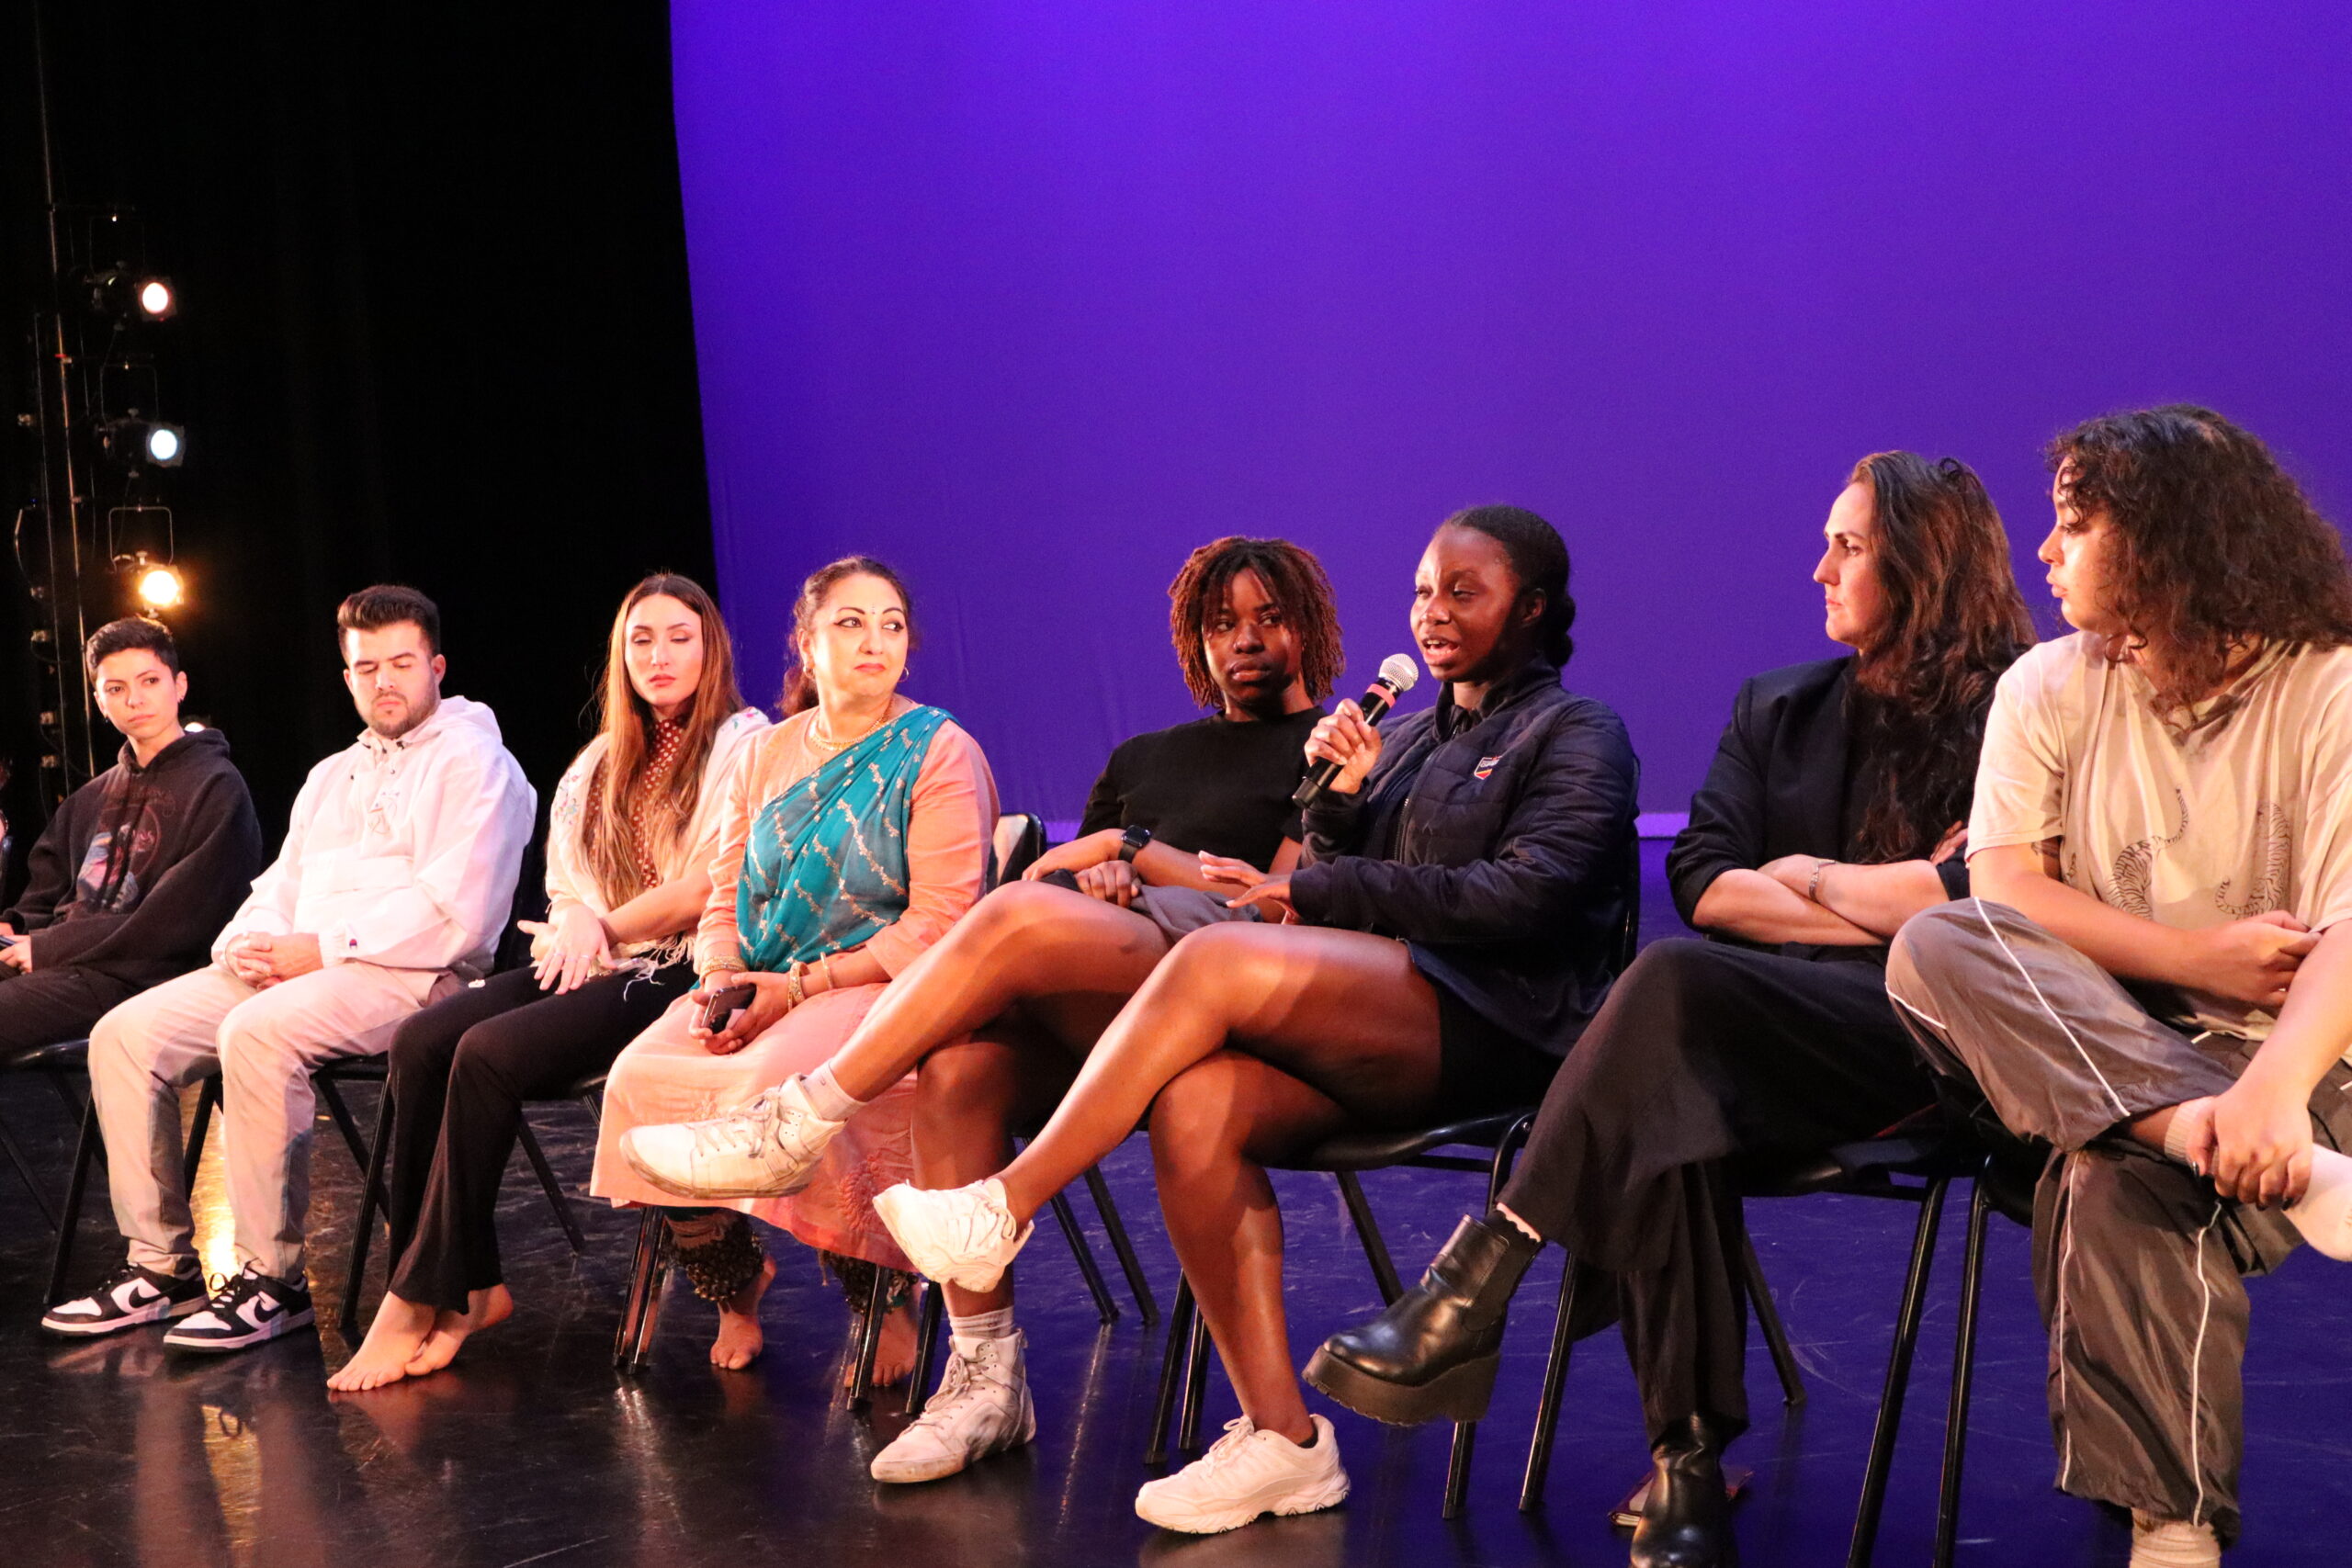 Dancers and Physical Therapists in Conversation: New Initiative at Dance Source Houston Opens Dialog